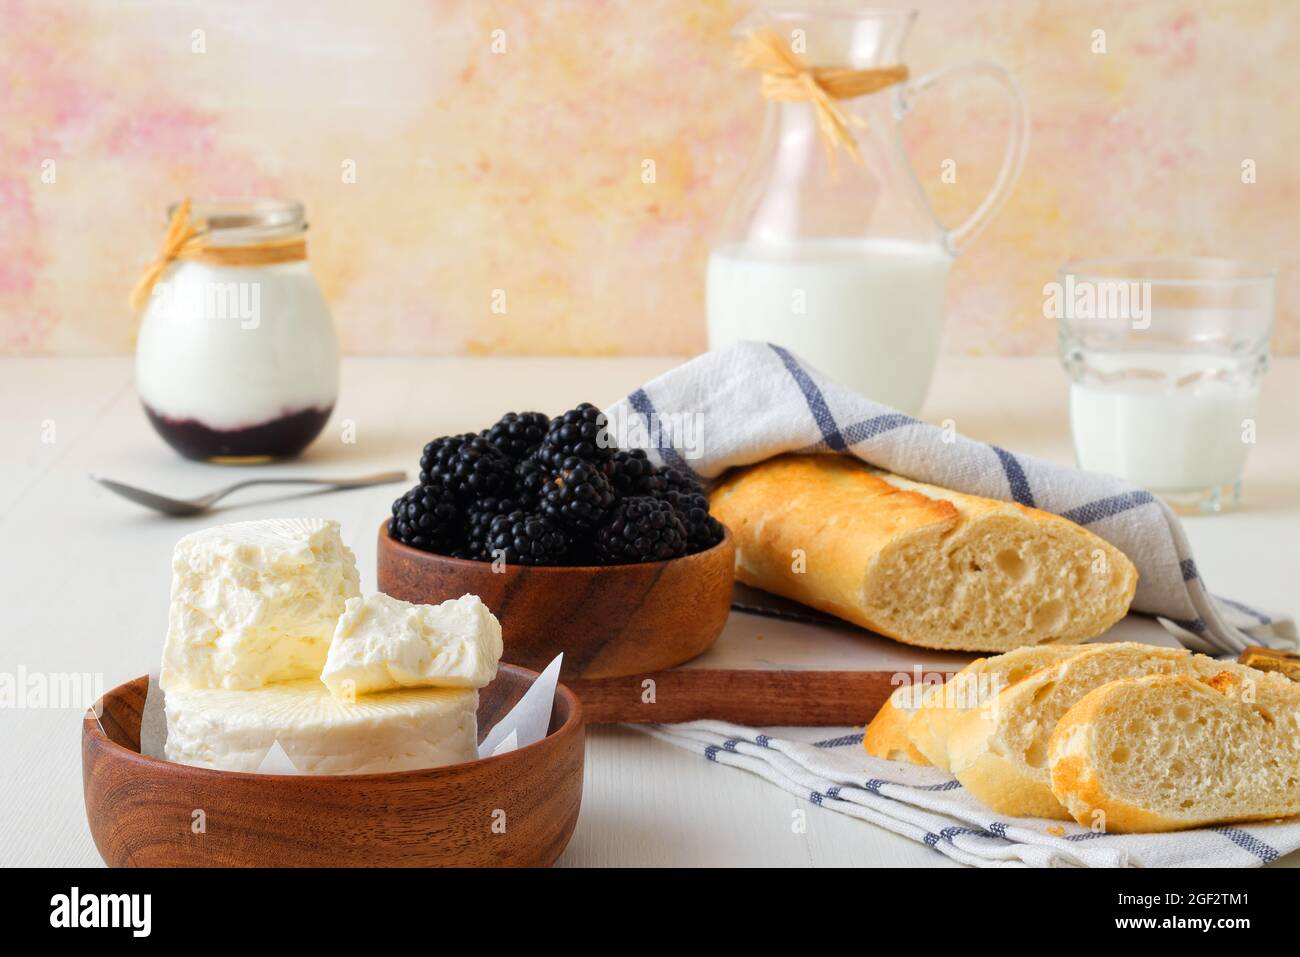 Bowl of blackberries, milk, yoghurt, fresh cheese and bread, a table set for breakfast, ingredients from the local farmers market. Closeup, front view Stock Photo